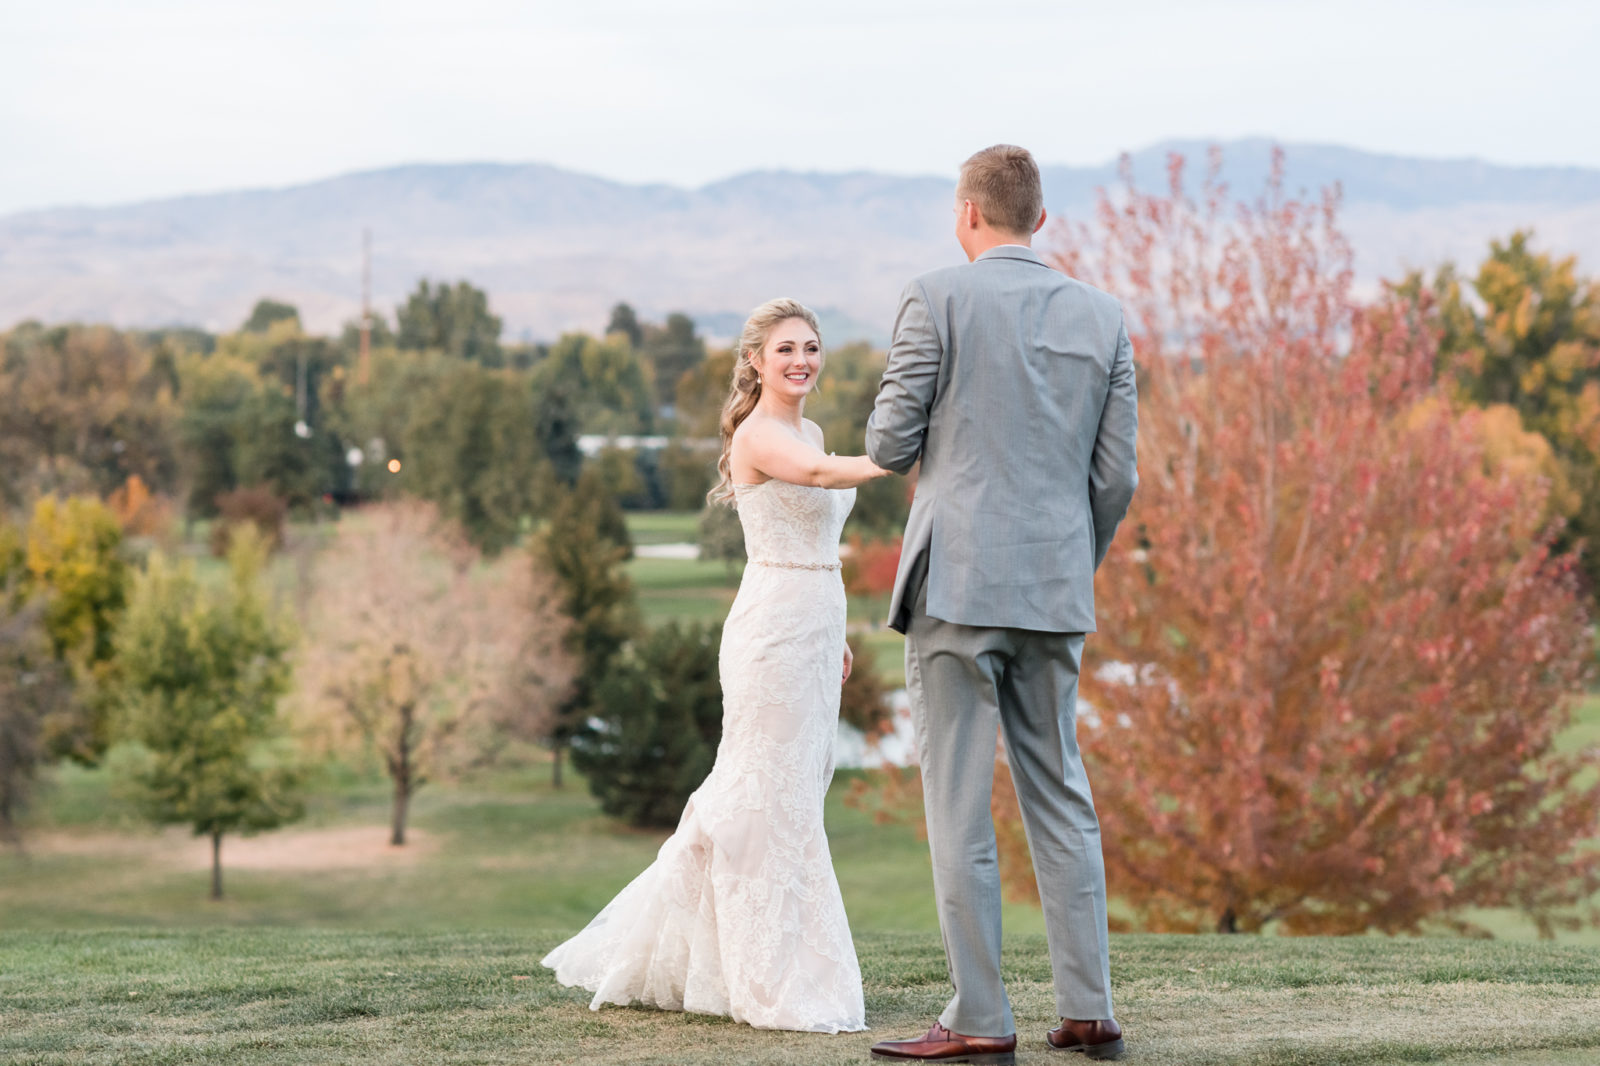 Hillcrest Country Club Bride and Groom Portrait